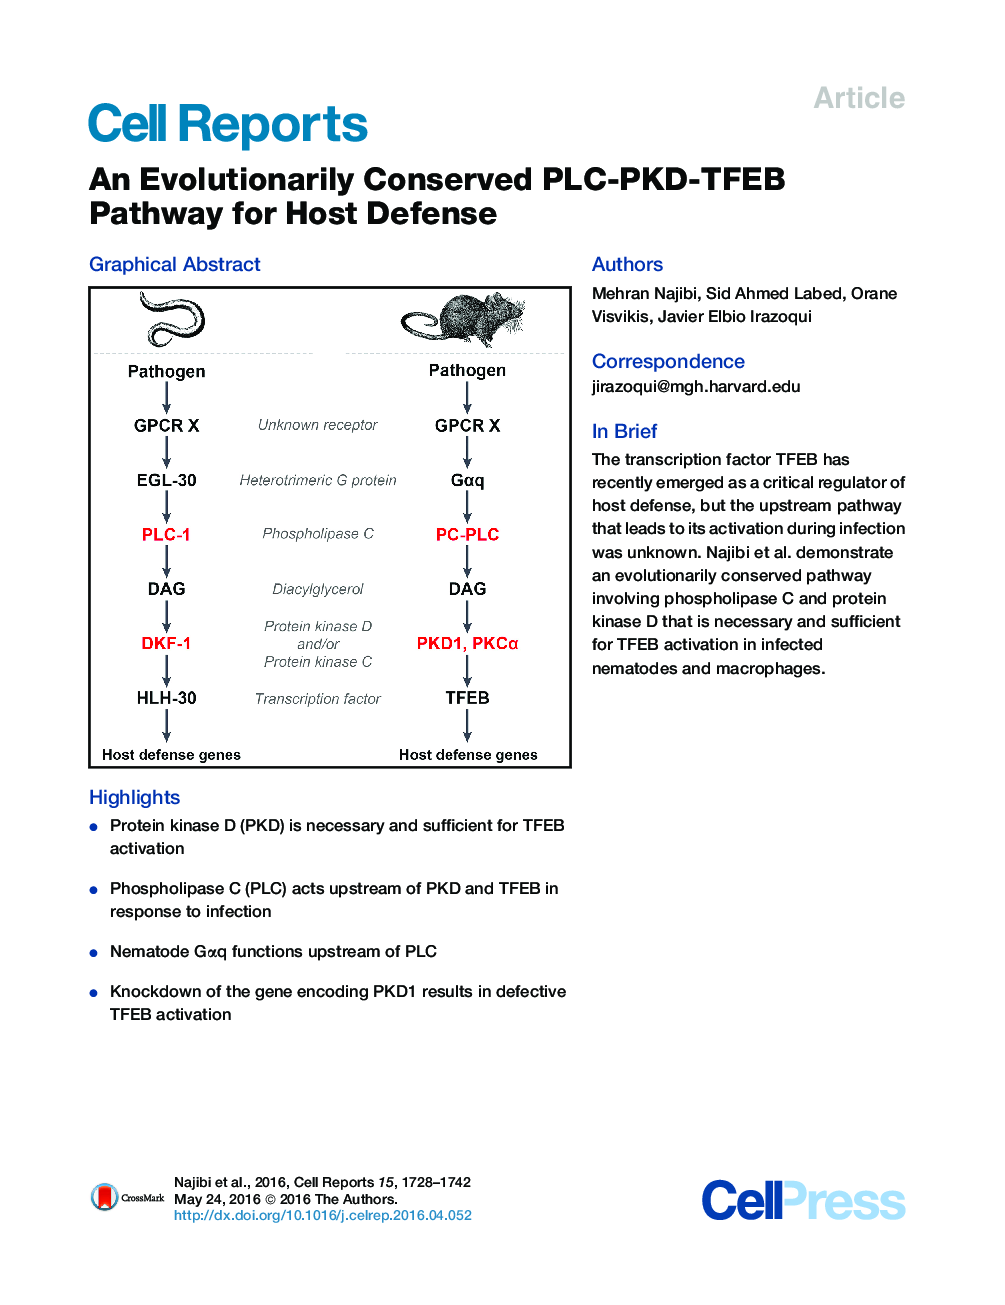 An Evolutionarily Conserved PLC-PKD-TFEB Pathway for Host Defense